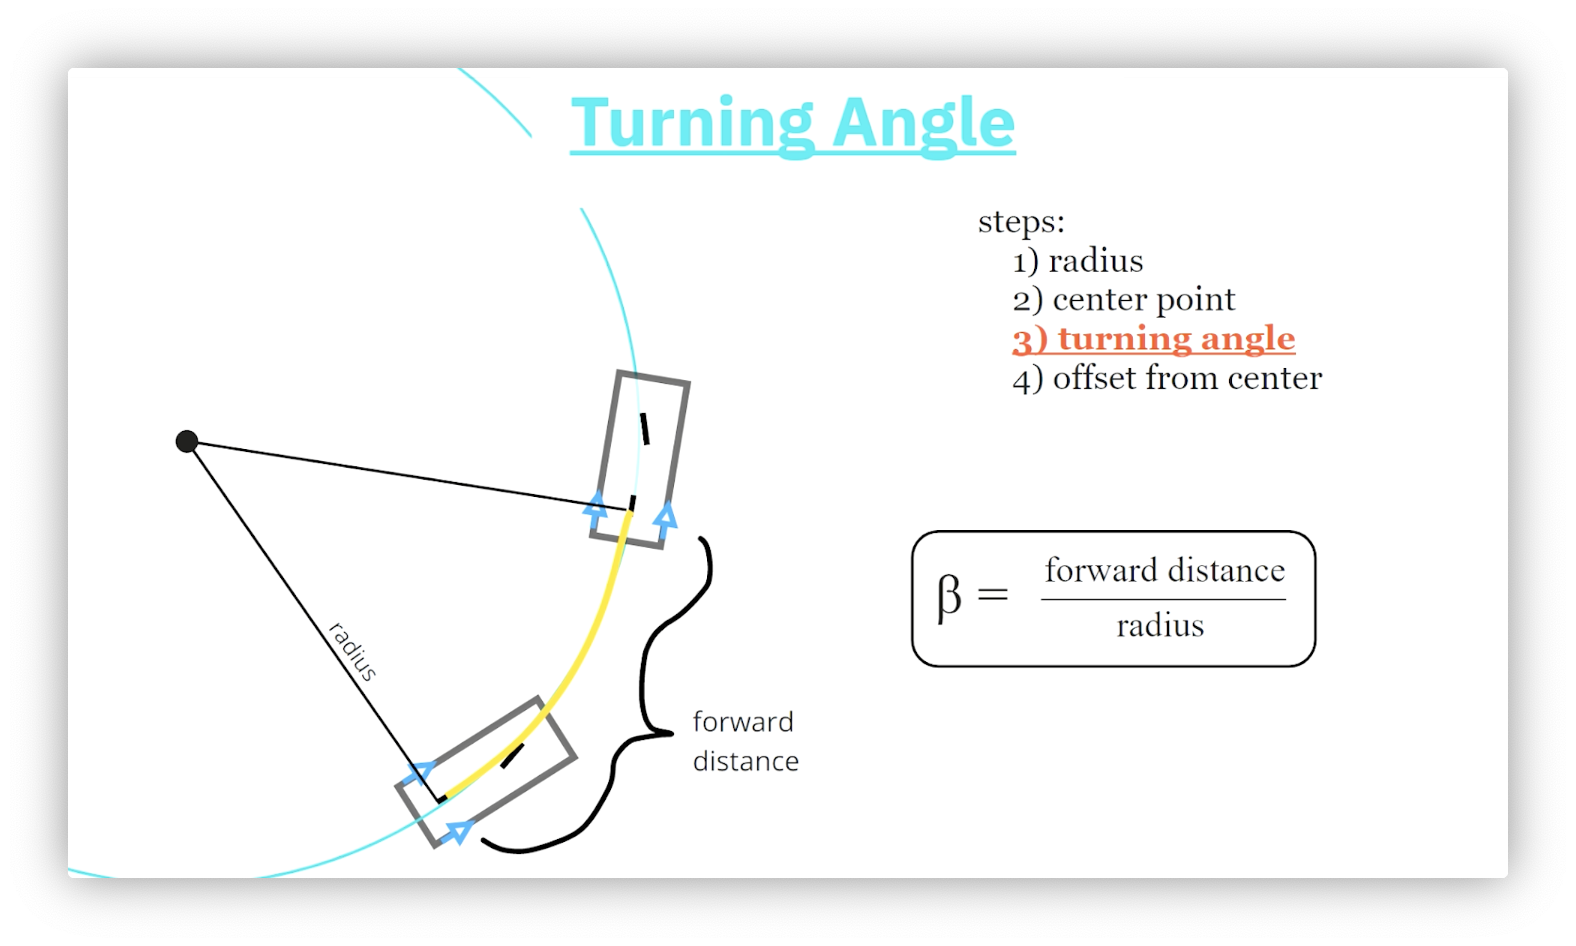 A diagram relating the arced forward distance traveled by the robot, the radius of the circle, and the central angle through which that arc sweeps.